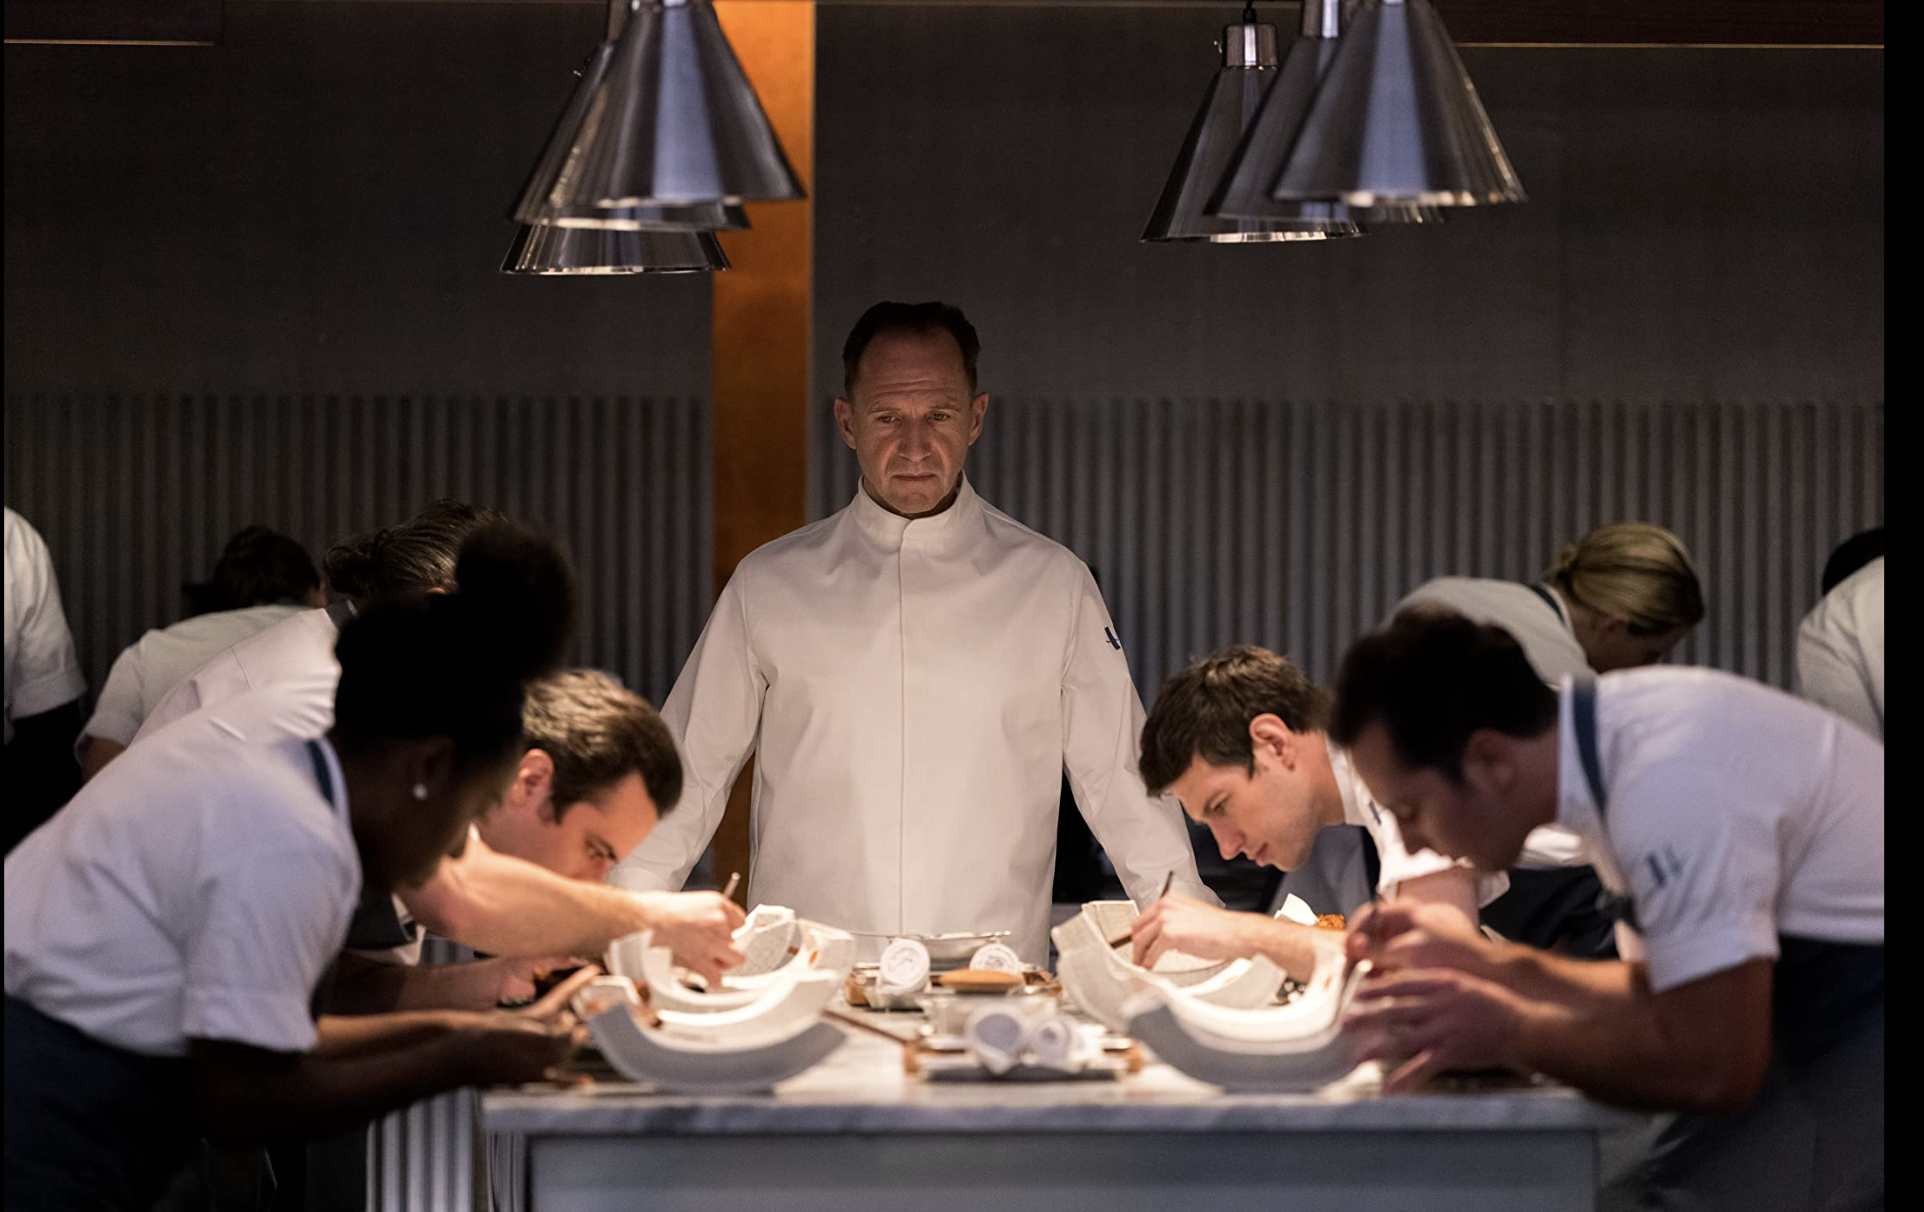 <p>Ralph Fiennes is a sinister chef with a deviously designed menu in the 2022 darkly comic foodie thriller that will both terrify you and make you crave a cheeseburger. A satirical look at fine dining restaurants, the 2022 film features beautiful shots of scrumptious dishes that look well.. expensive, and Anya Taylor-Joy's eating a cheeseburger that looks just amazing.</p>